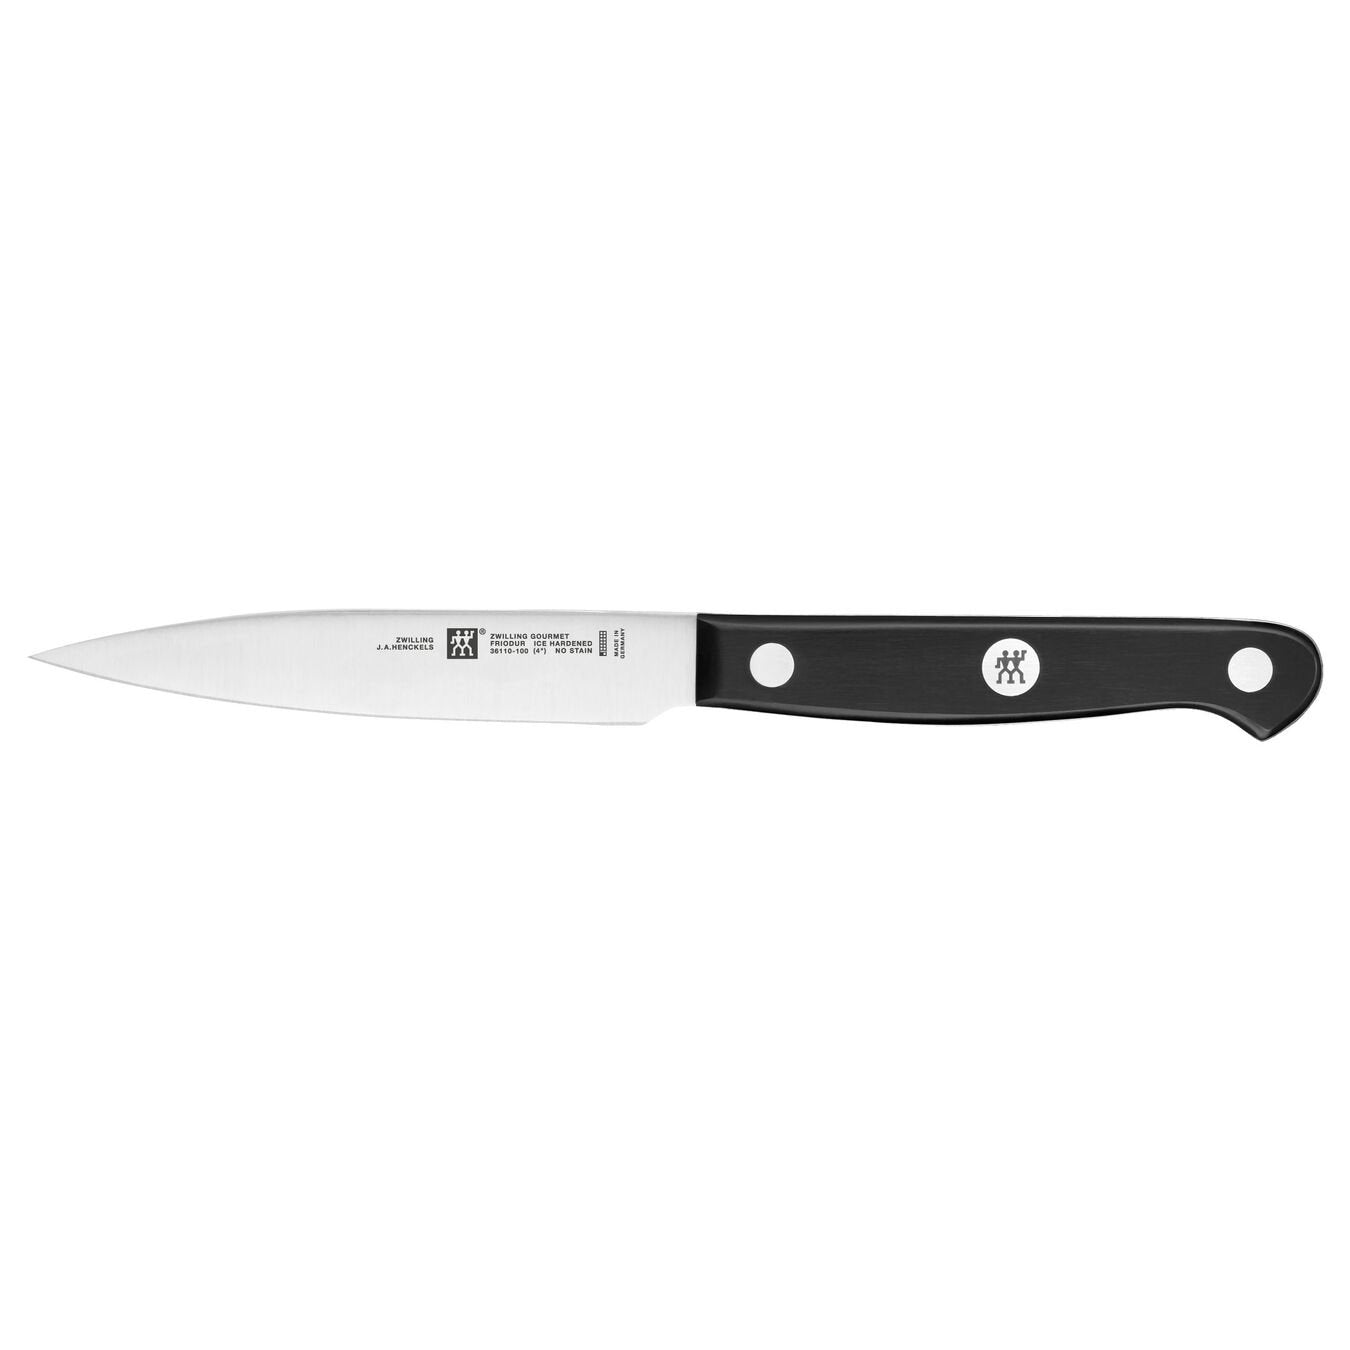 paring knife with riveted black handle on white background